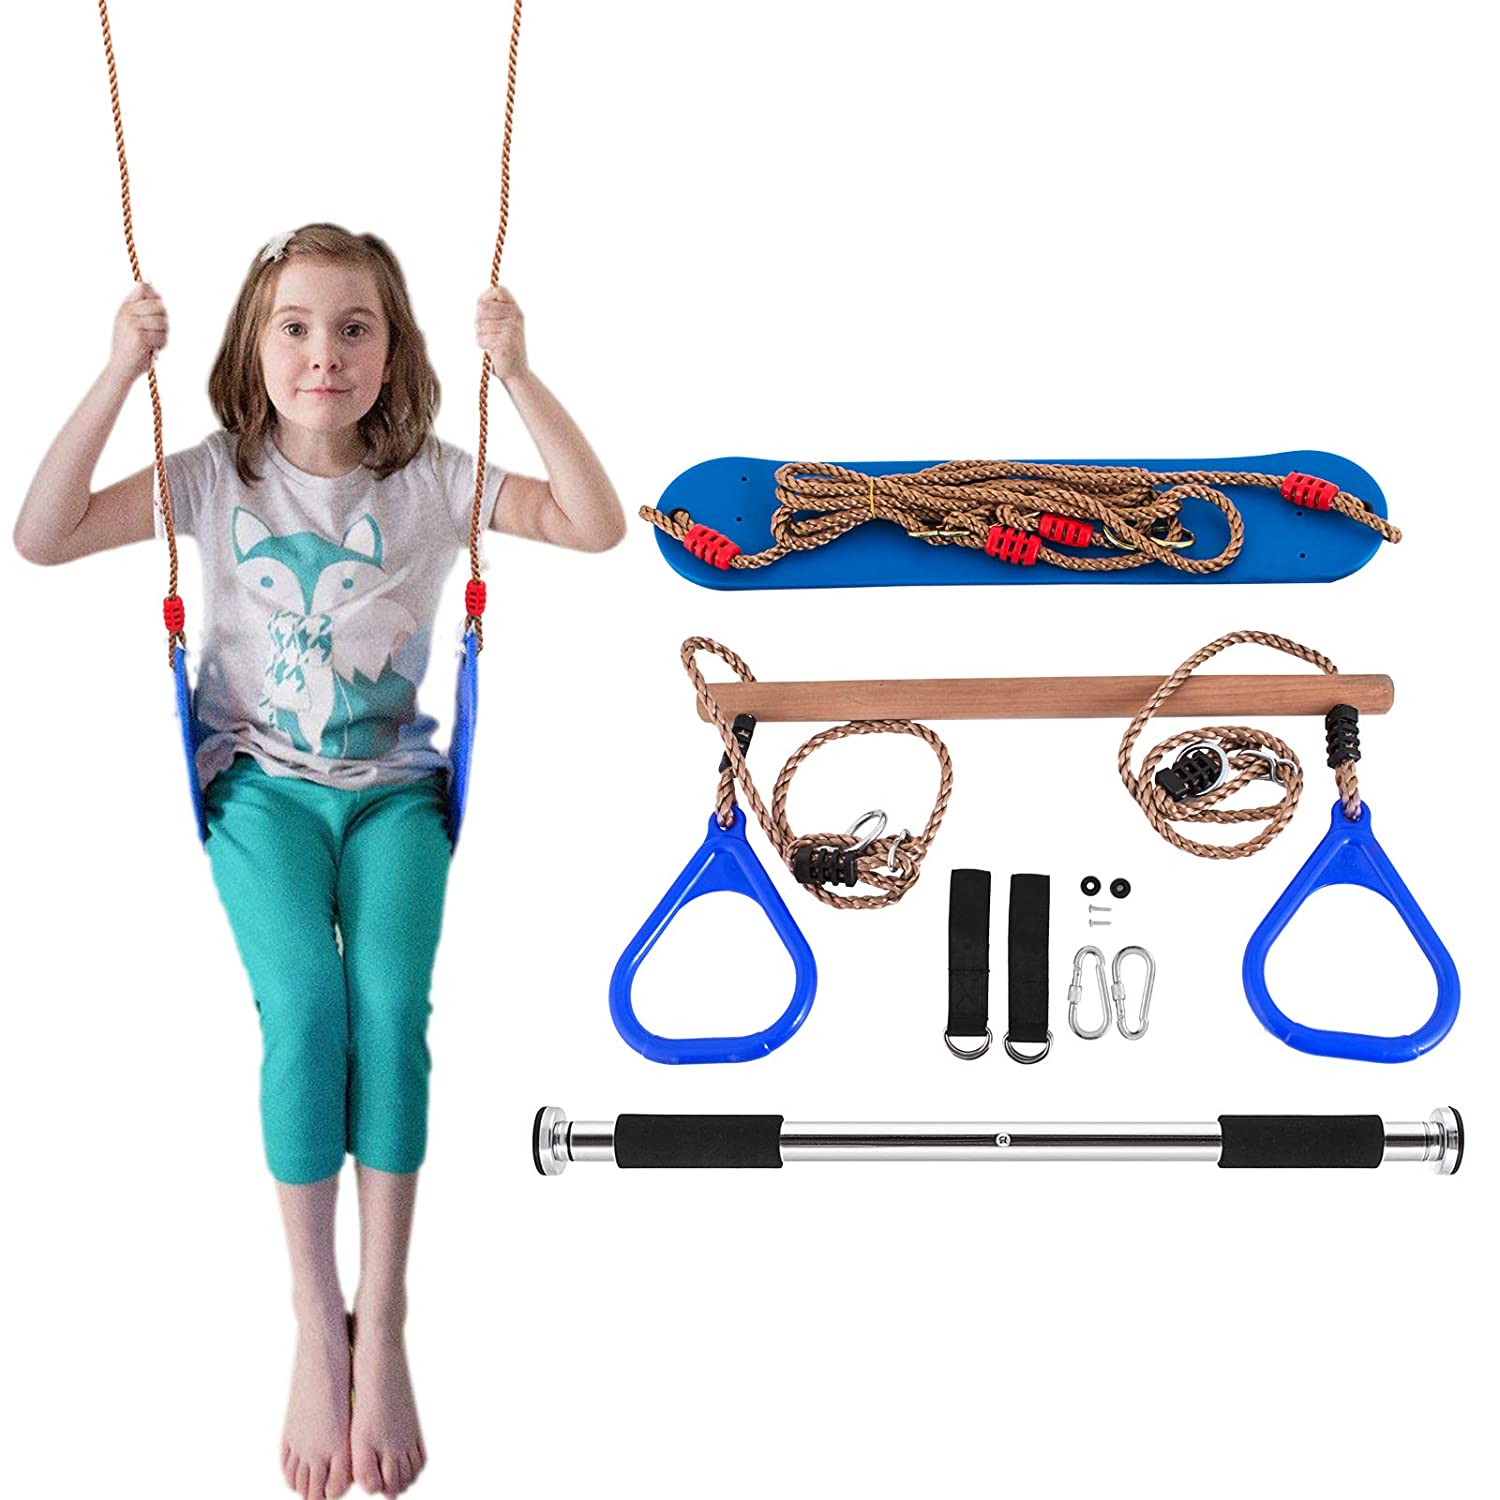 Popsport Trapeze Bar with Rings Gymnastic Swing Set Combo for Outdoor Play, Backyard Swing Set, Jungle Gym